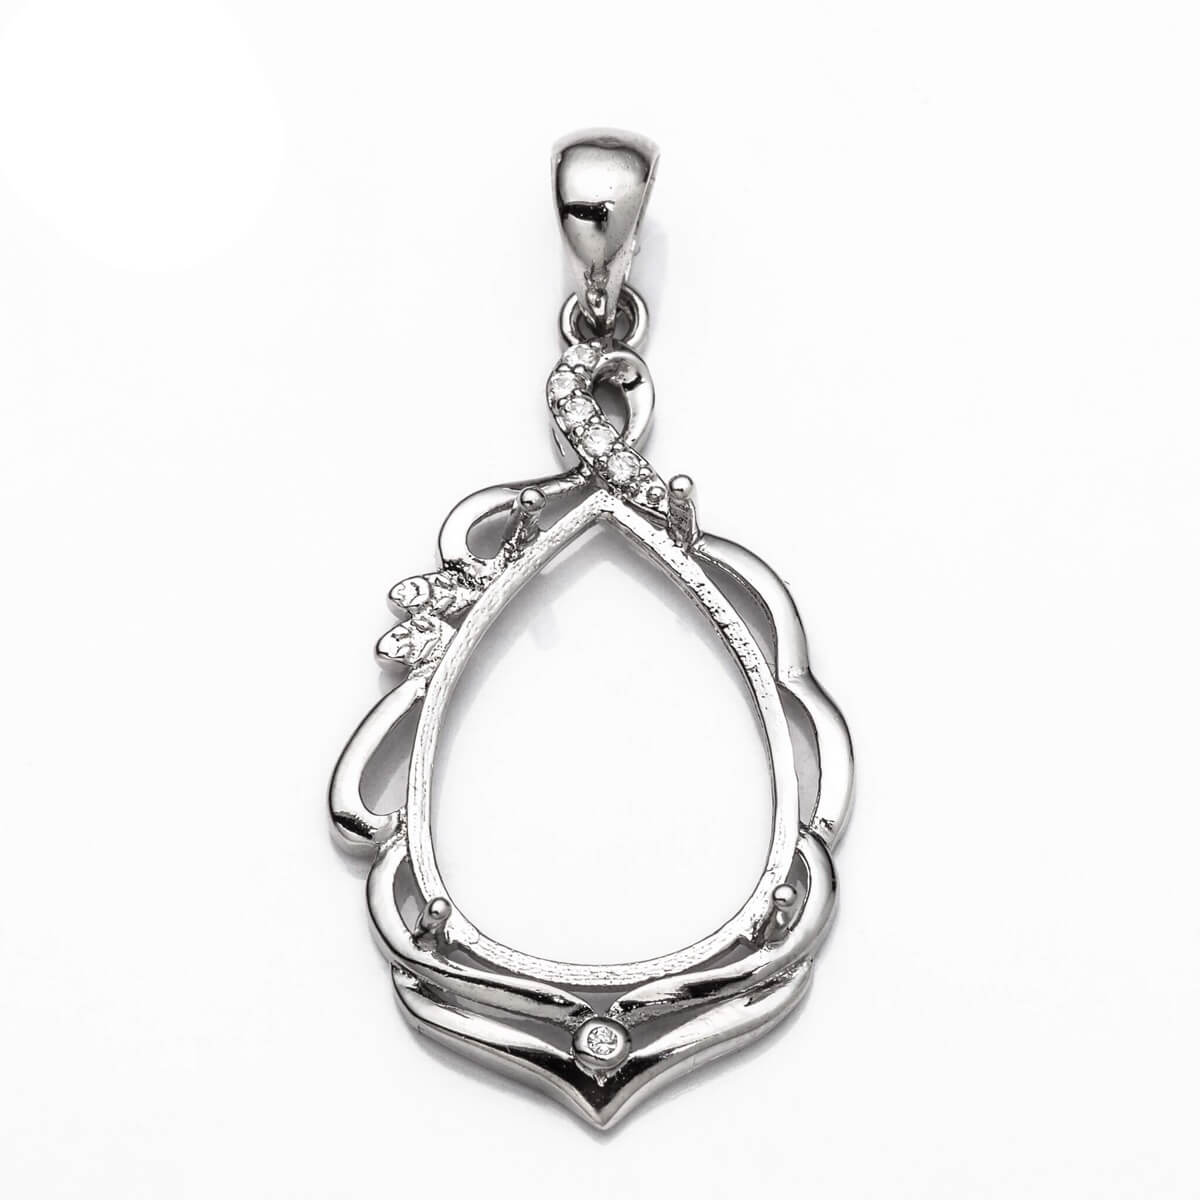 Pear Pendant with Cubic Zirconia Inlays and Pear Shape Mounting and Bail in Sterling Silver 12x18mm 